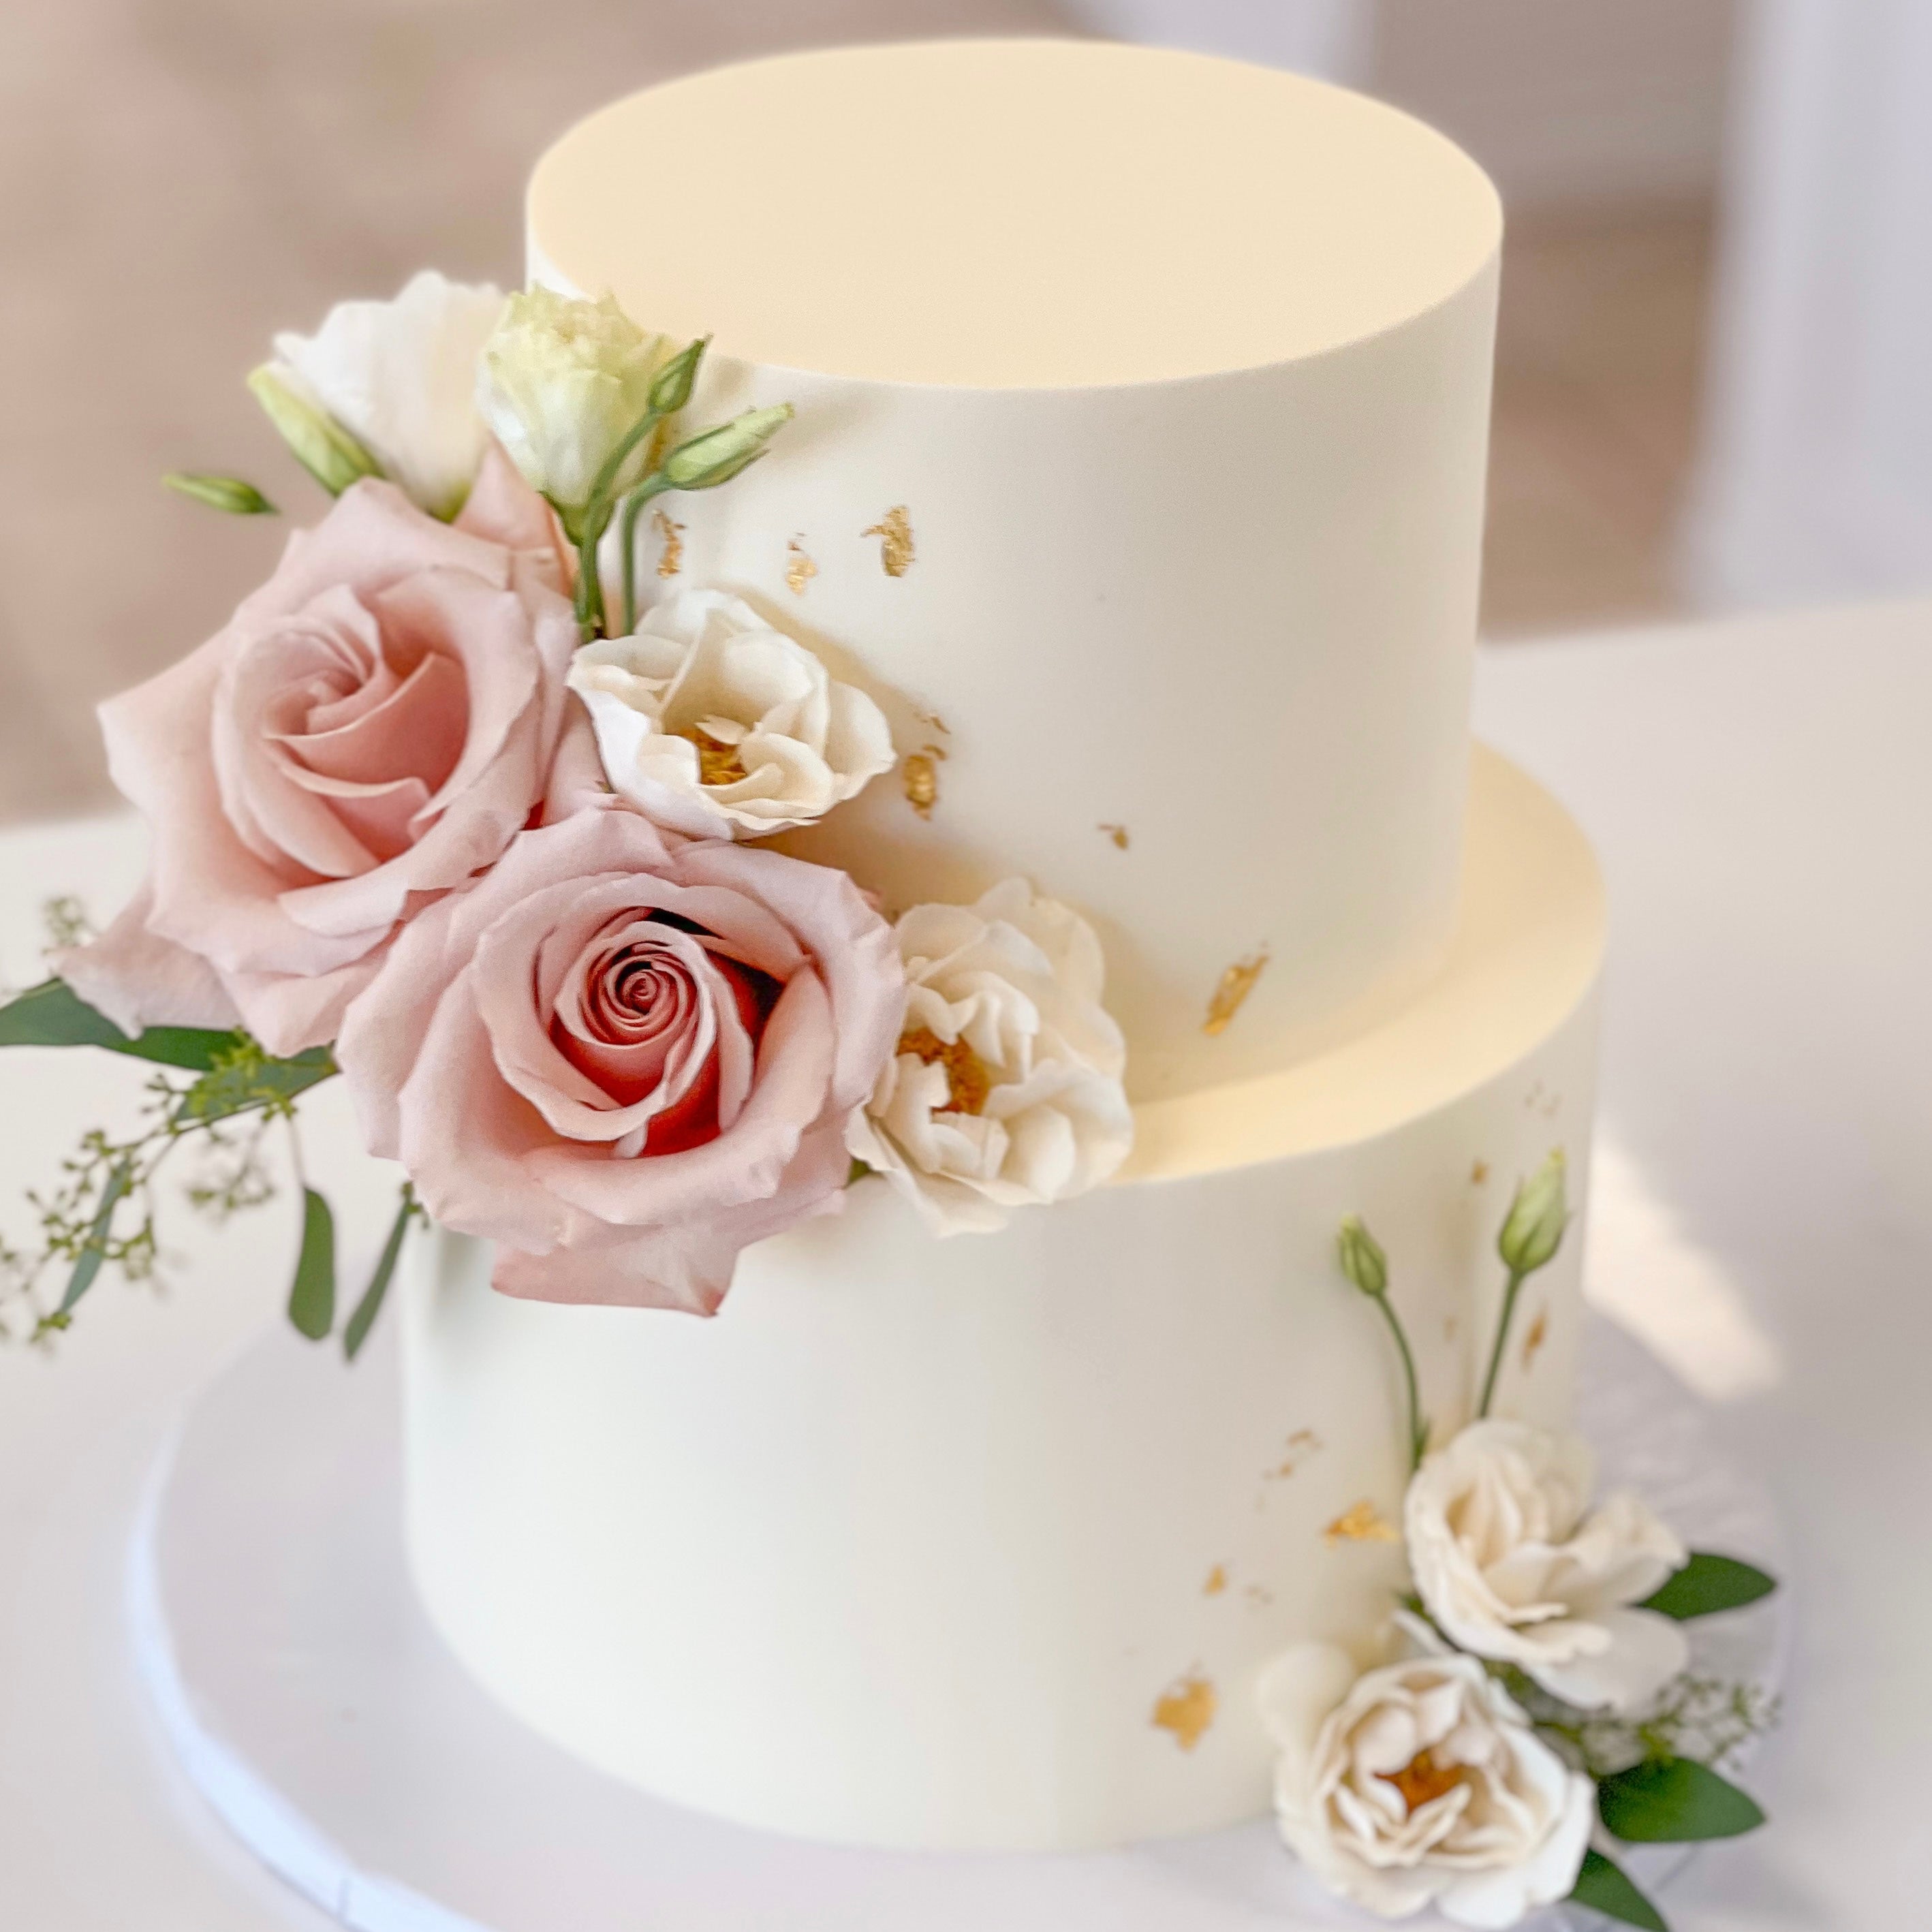 Edible Pressed Flower Cake Decoration Archives - Wild Blossoms Studio